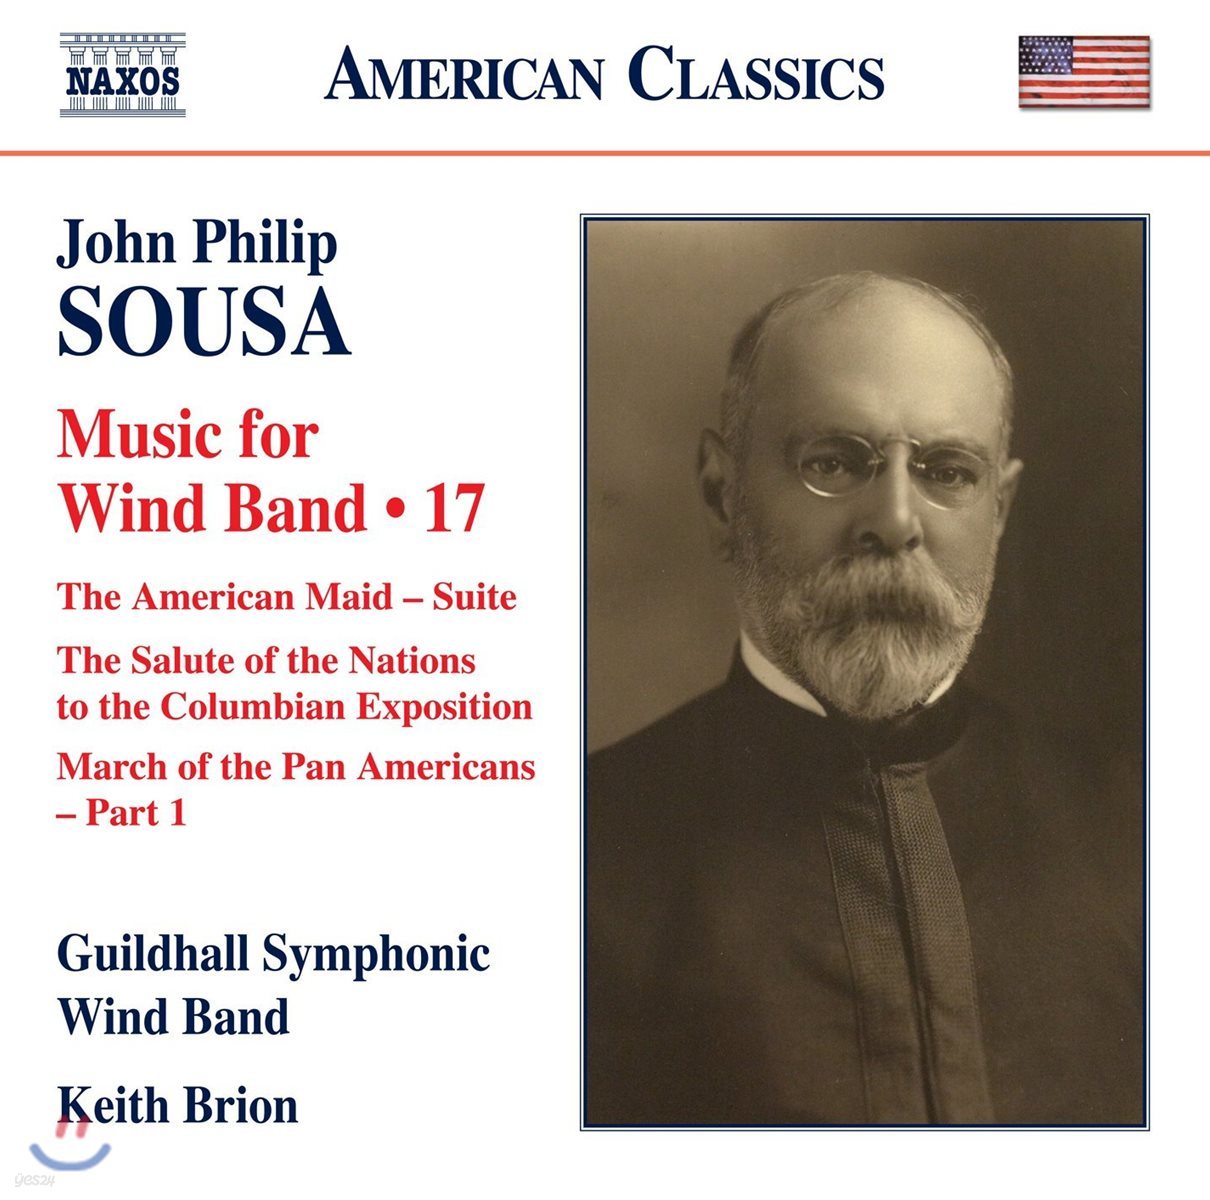 Guildhall Symphonic Wind Band 존 필립 수자: 관악 밴드를 위한 작품 17집 (John Philip Sousa: Music For Wind Band Music 17) 